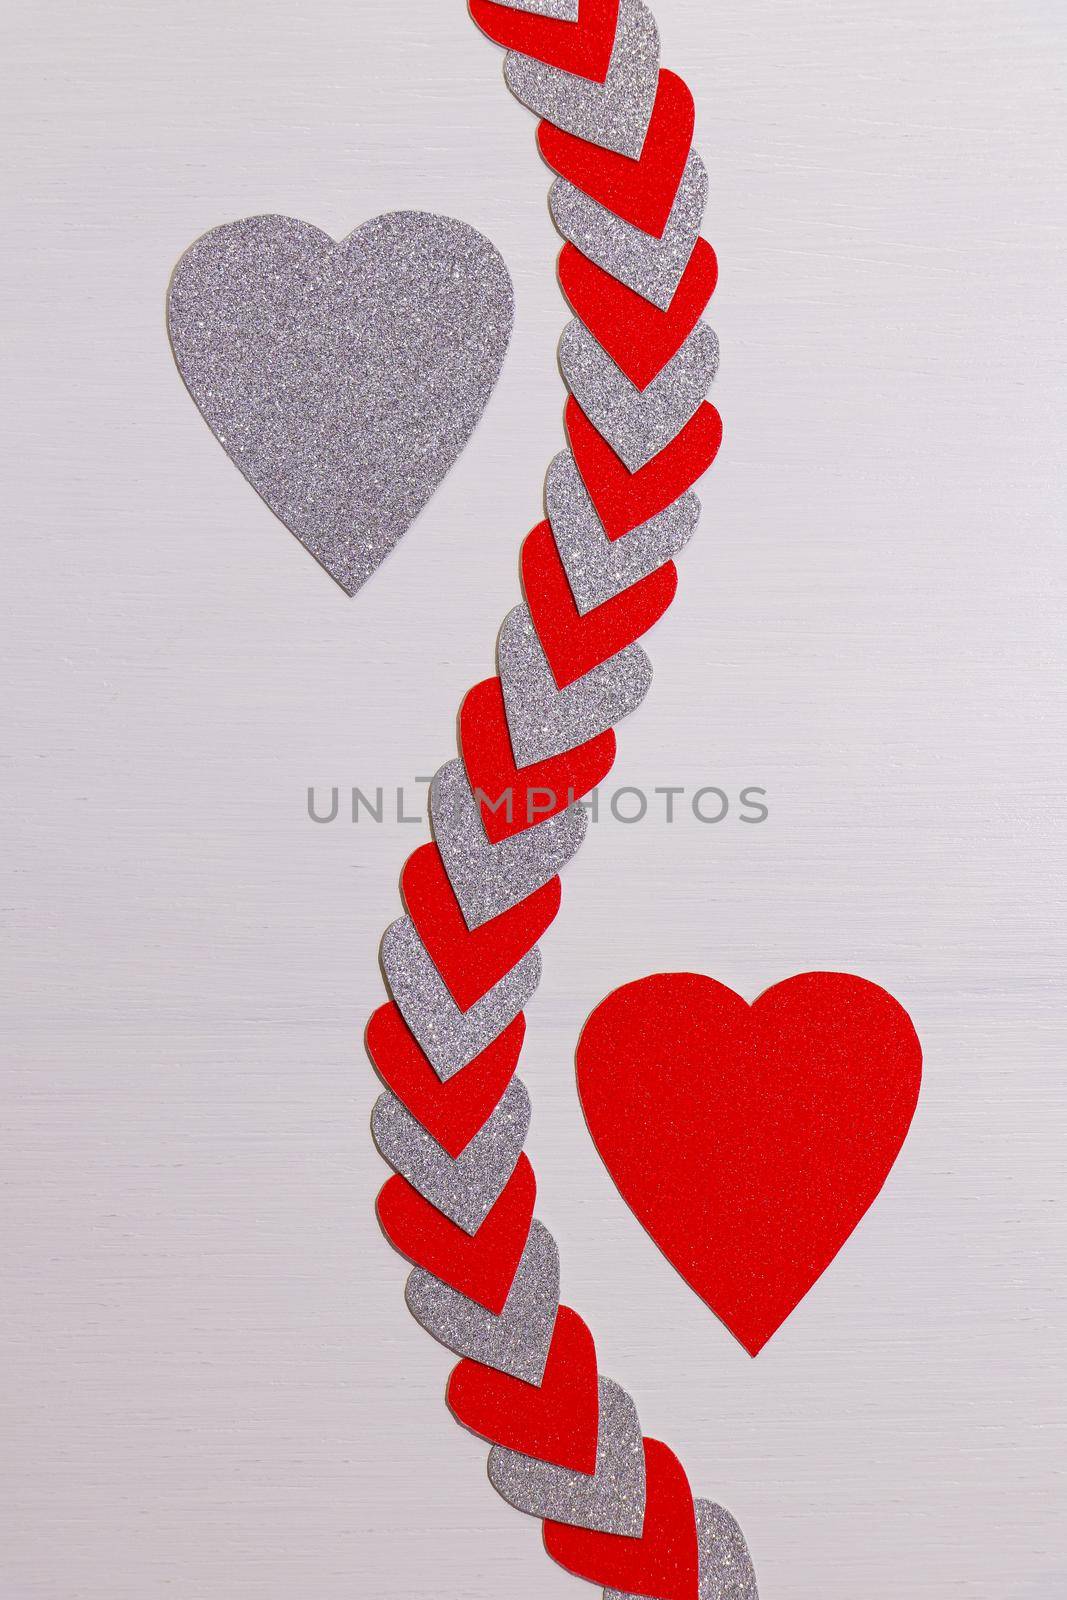 Red And Silver Hearts Apart With String Of Hearts On Textured White by jjvanginkel